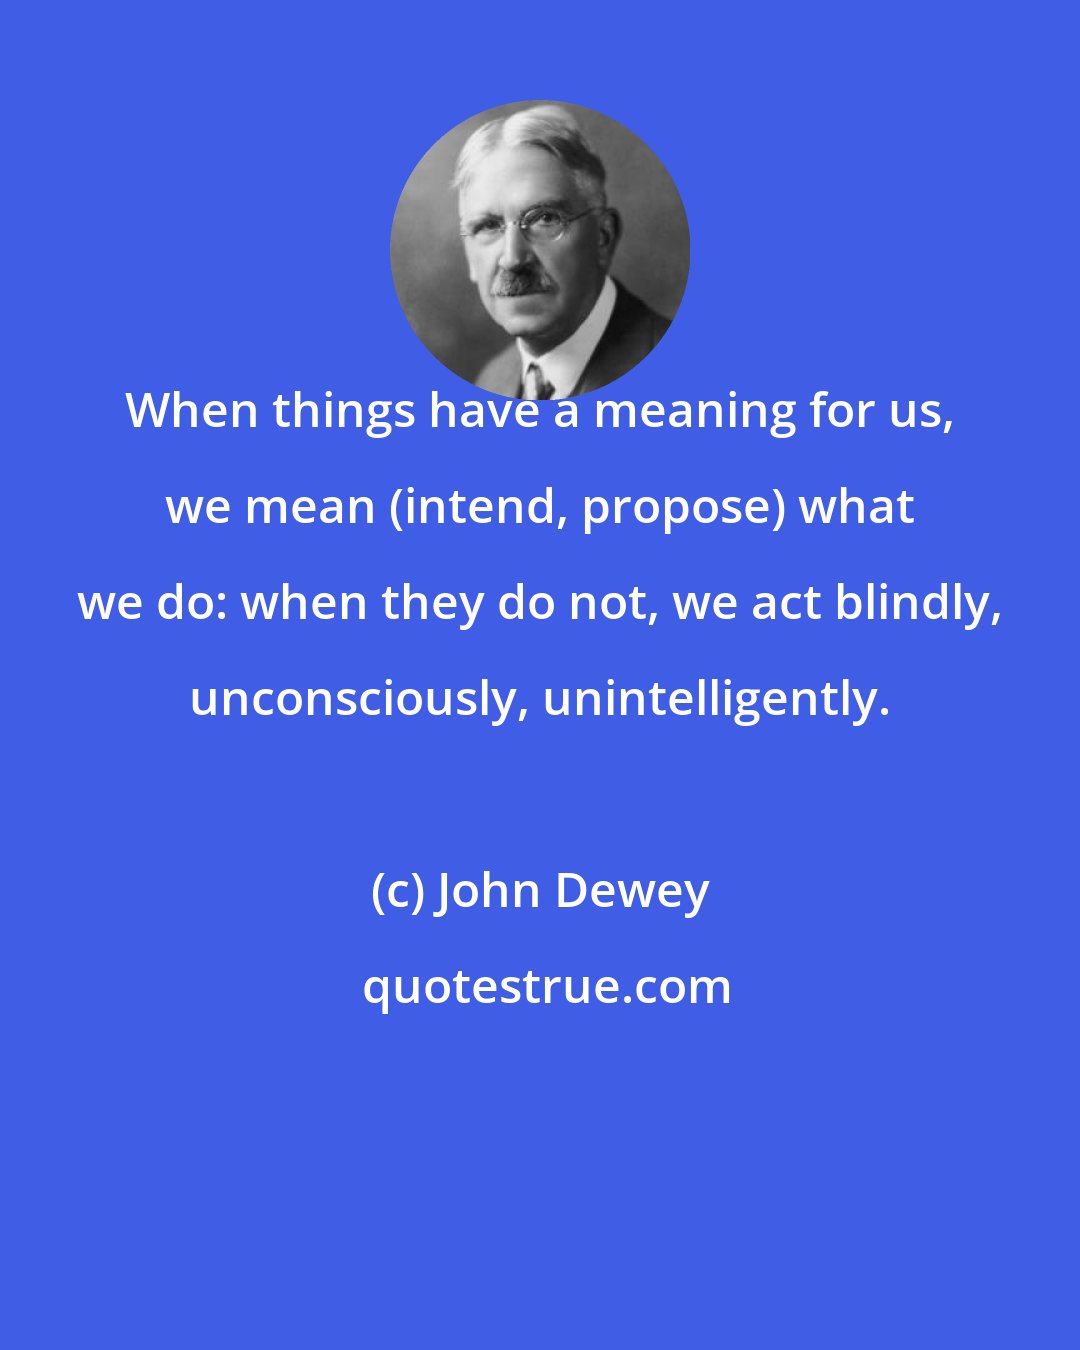 John Dewey: When things have a meaning for us, we mean (intend, propose) what we do: when they do not, we act blindly, unconsciously, unintelligently.